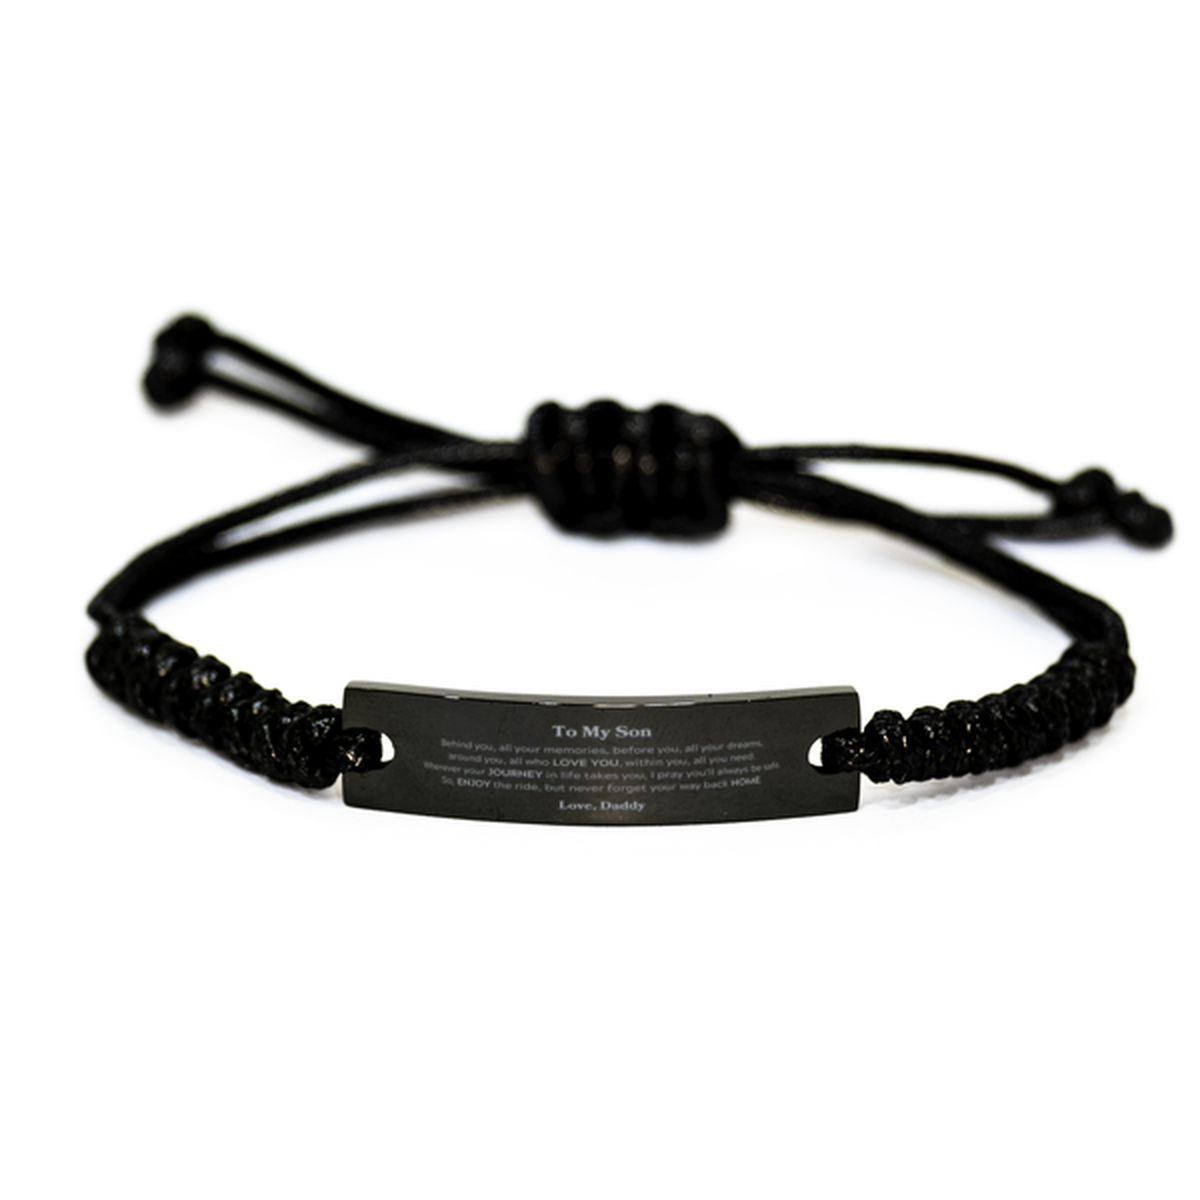 To My Son Graduation Gifts from Daddy, Son Black Rope Bracelet Christmas Birthday Gifts for Son Behind you, all your memories, before you, all your dreams. Love, Daddy